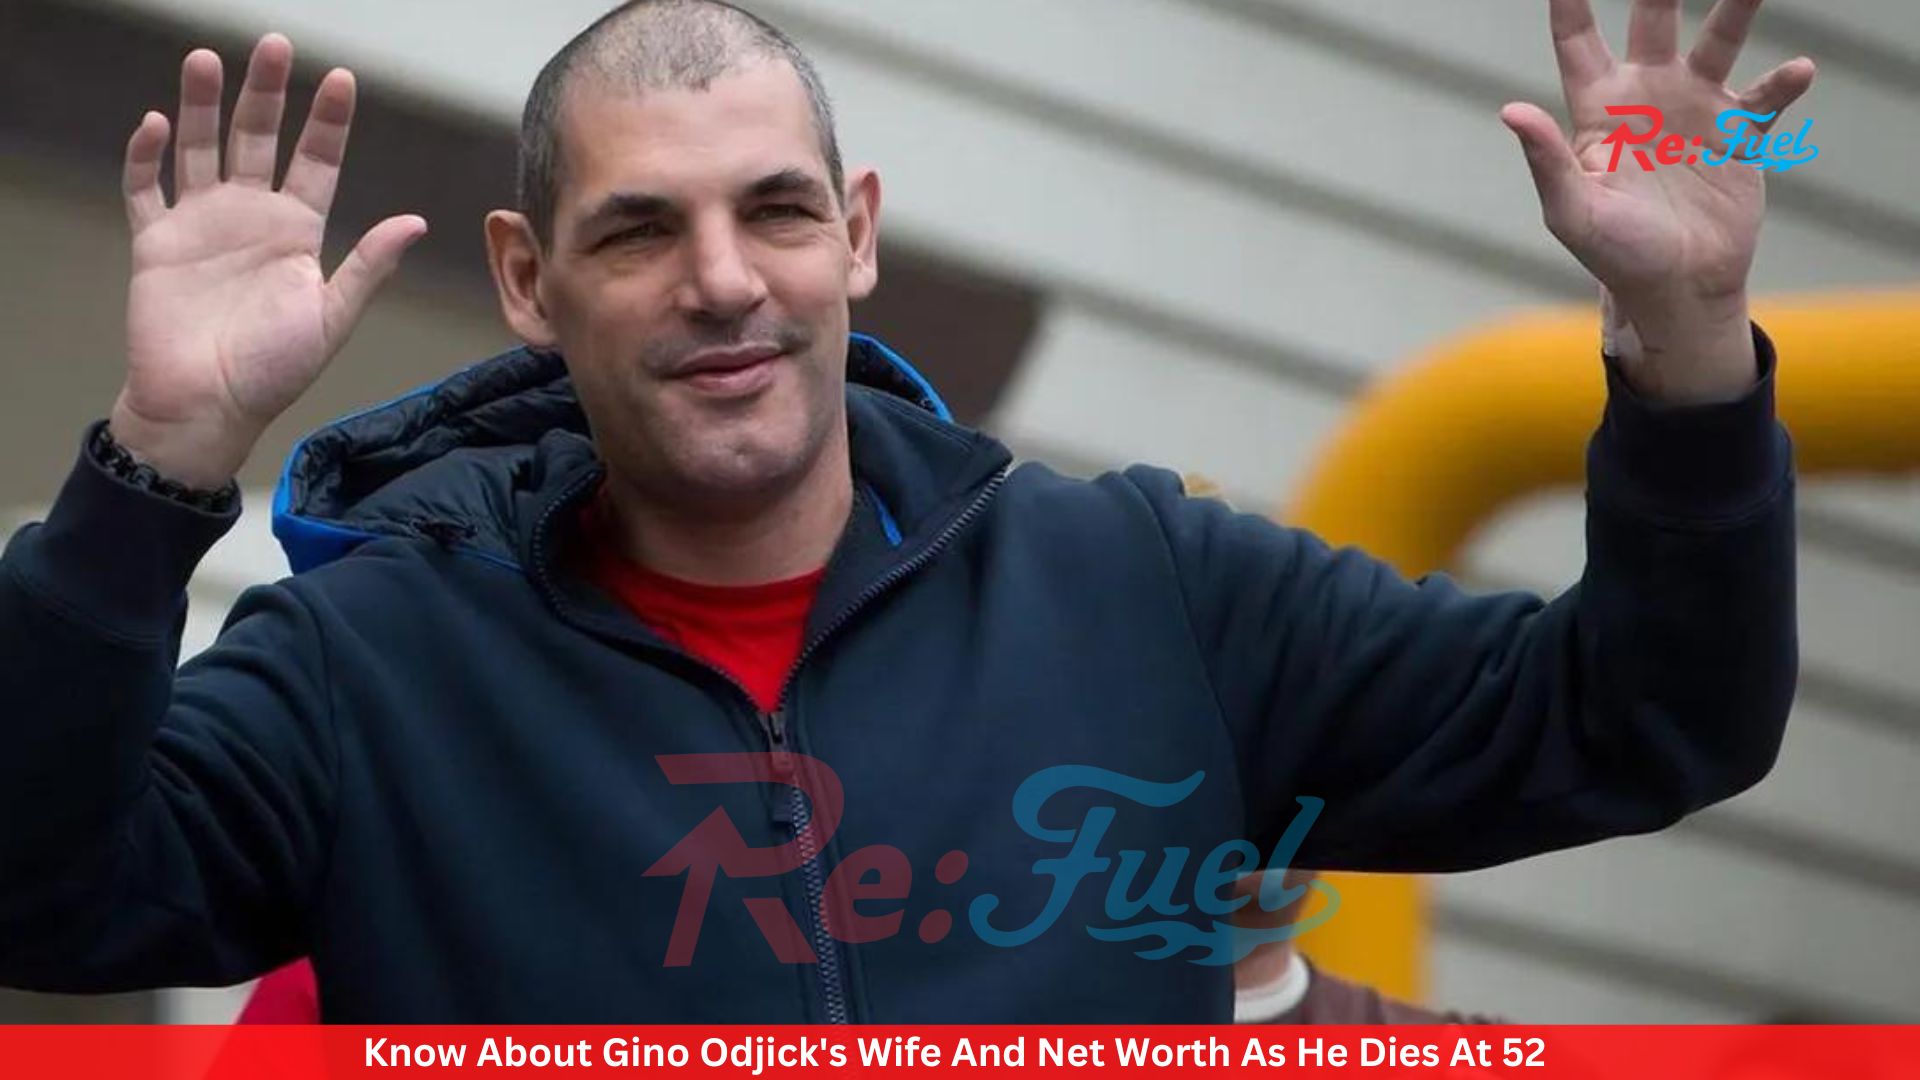 Know About Gino Odjick's Wife And Net Worth As The Former NHL Player Dies At 52